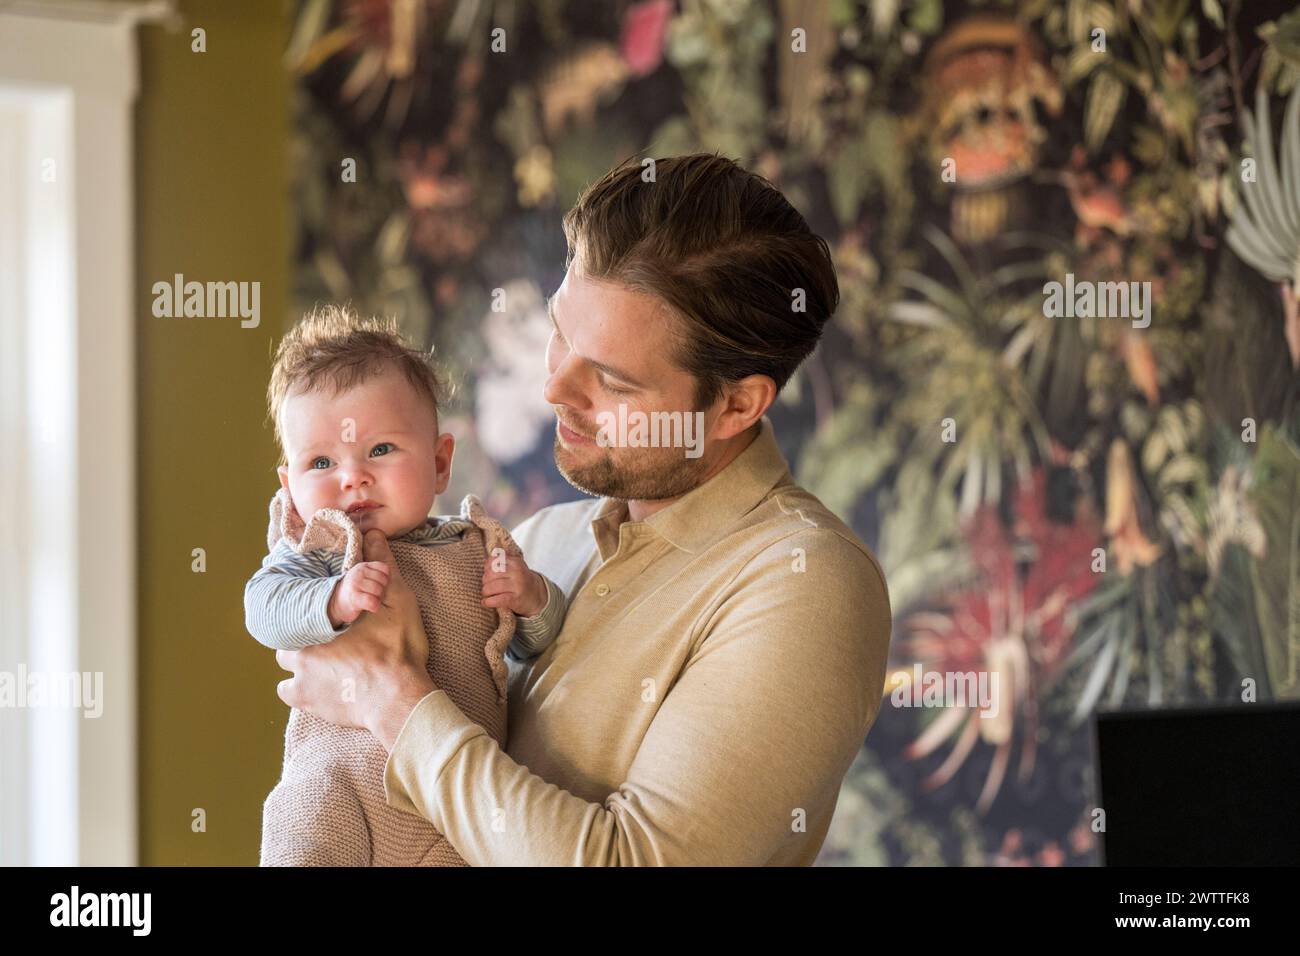 Young father holding his baby in a cozy room with a vibrant floral wallpaper background. Stock Photo